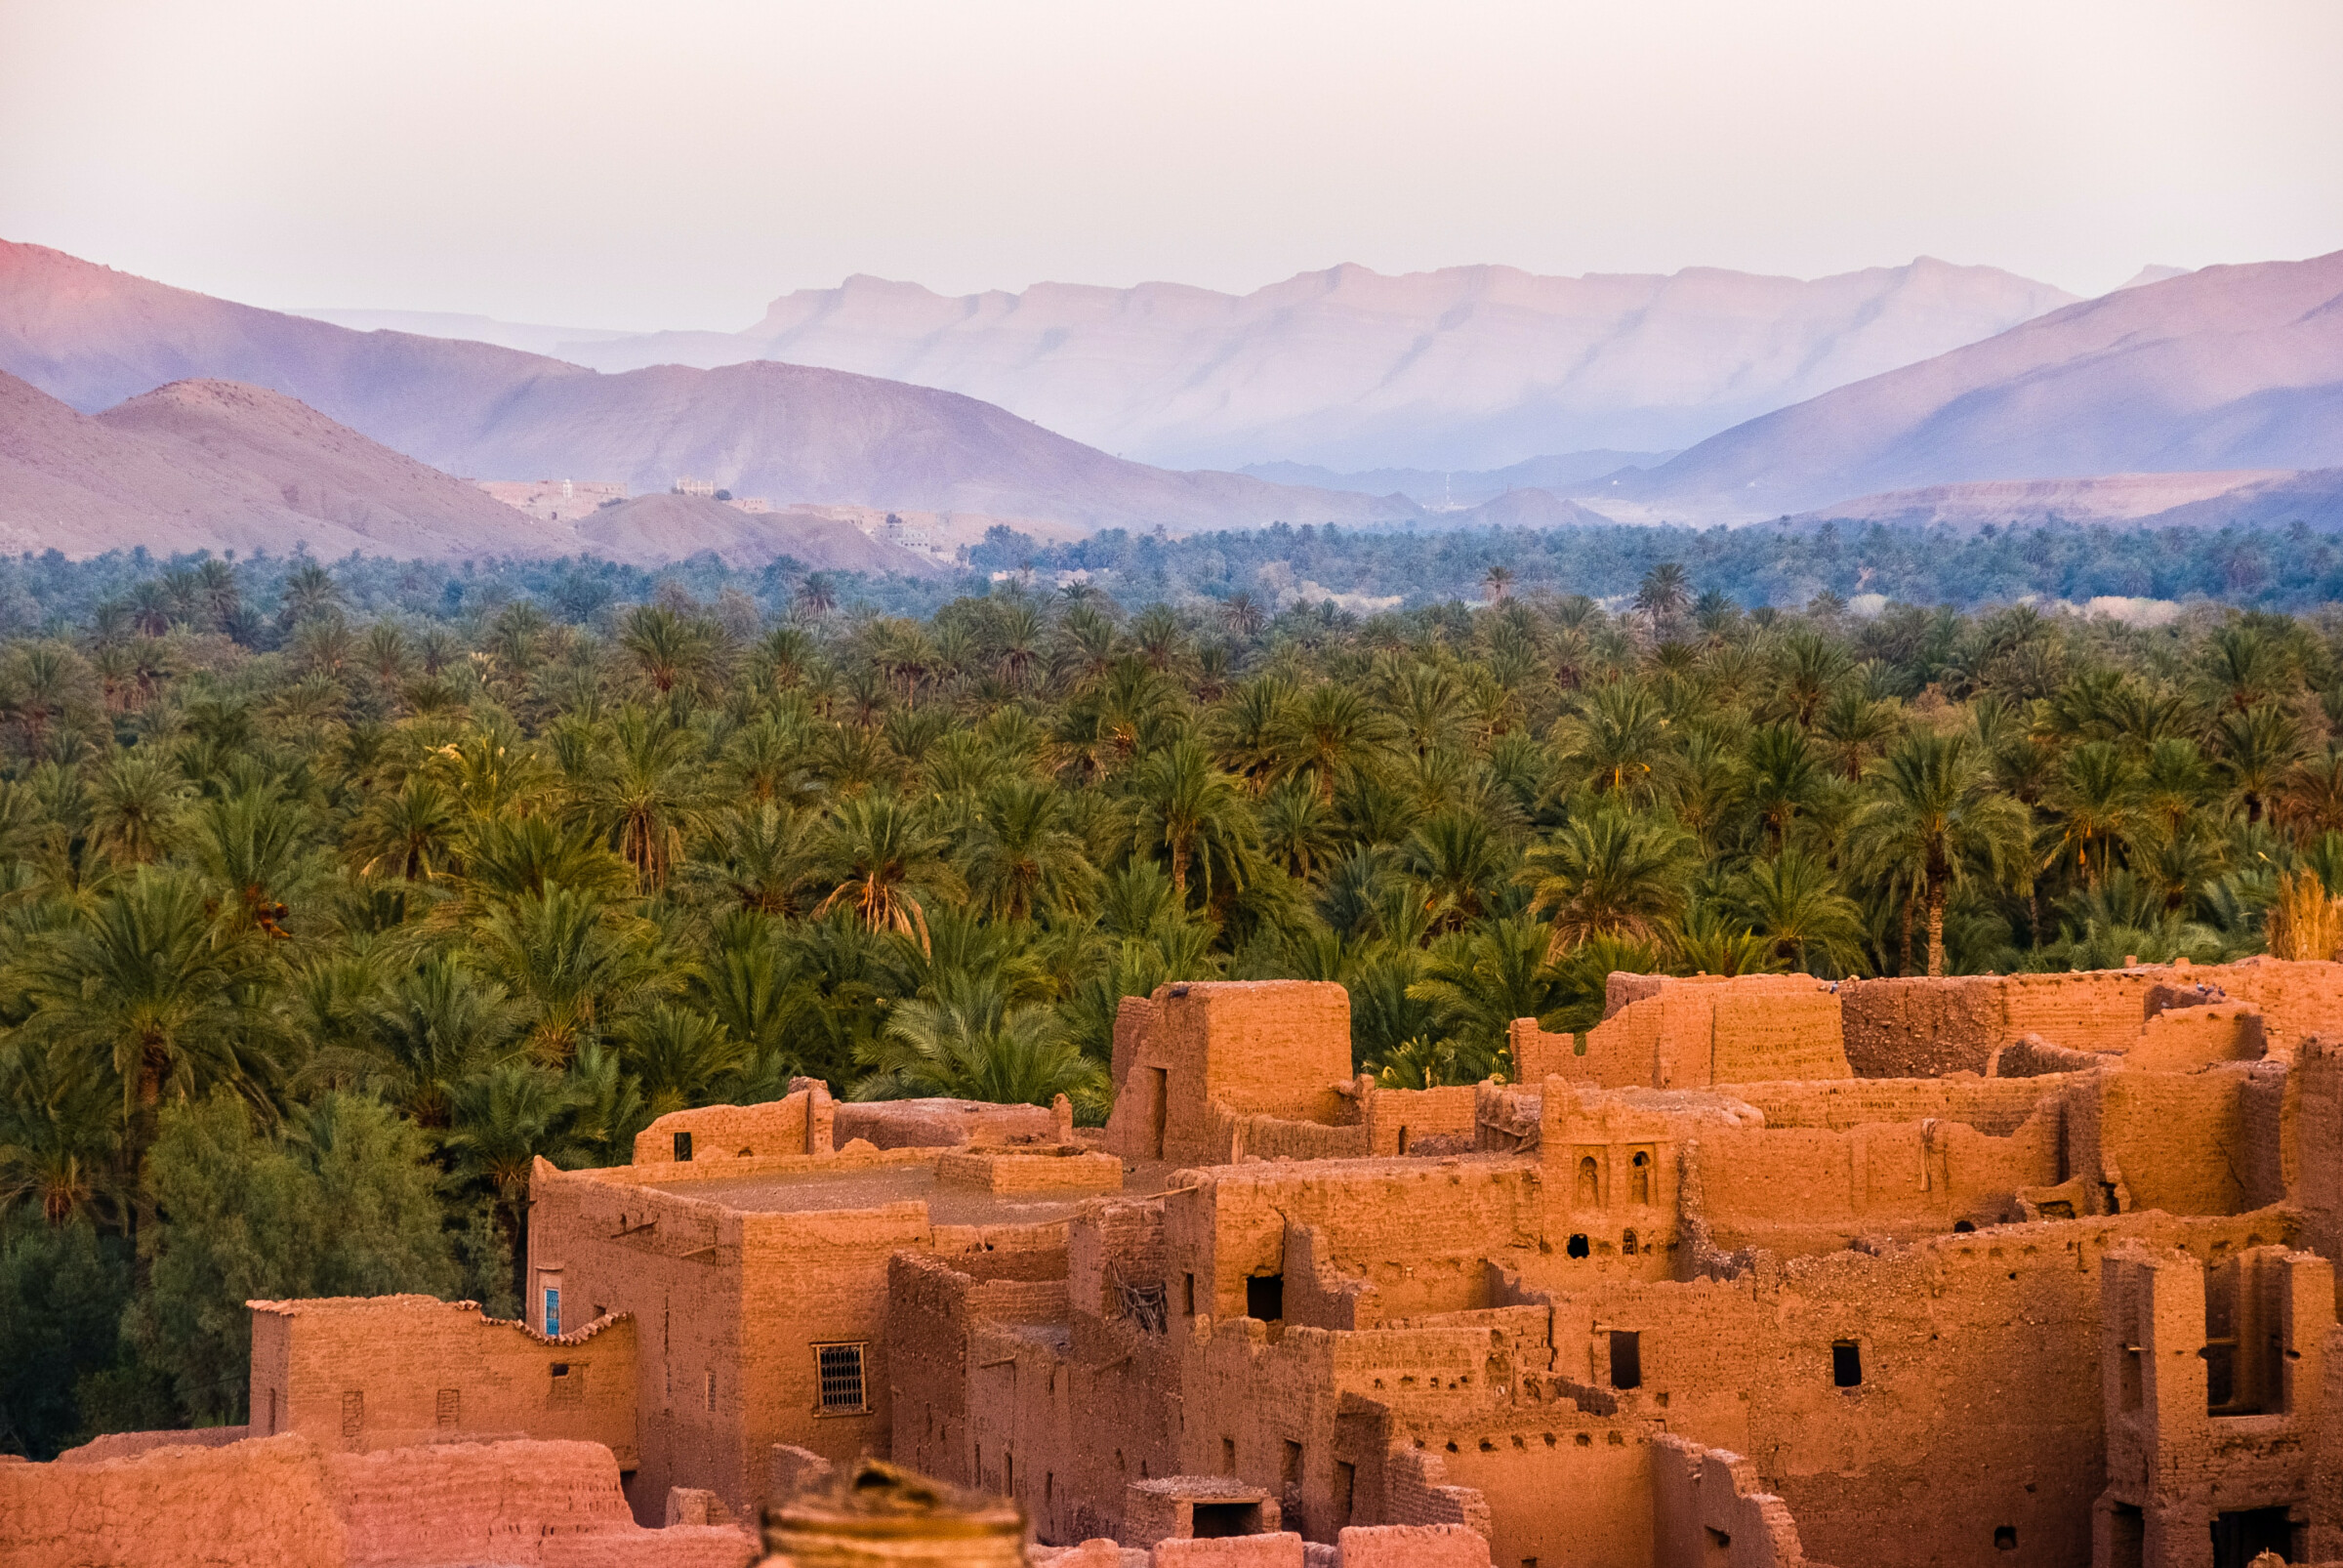 History and curiosities about Morocco